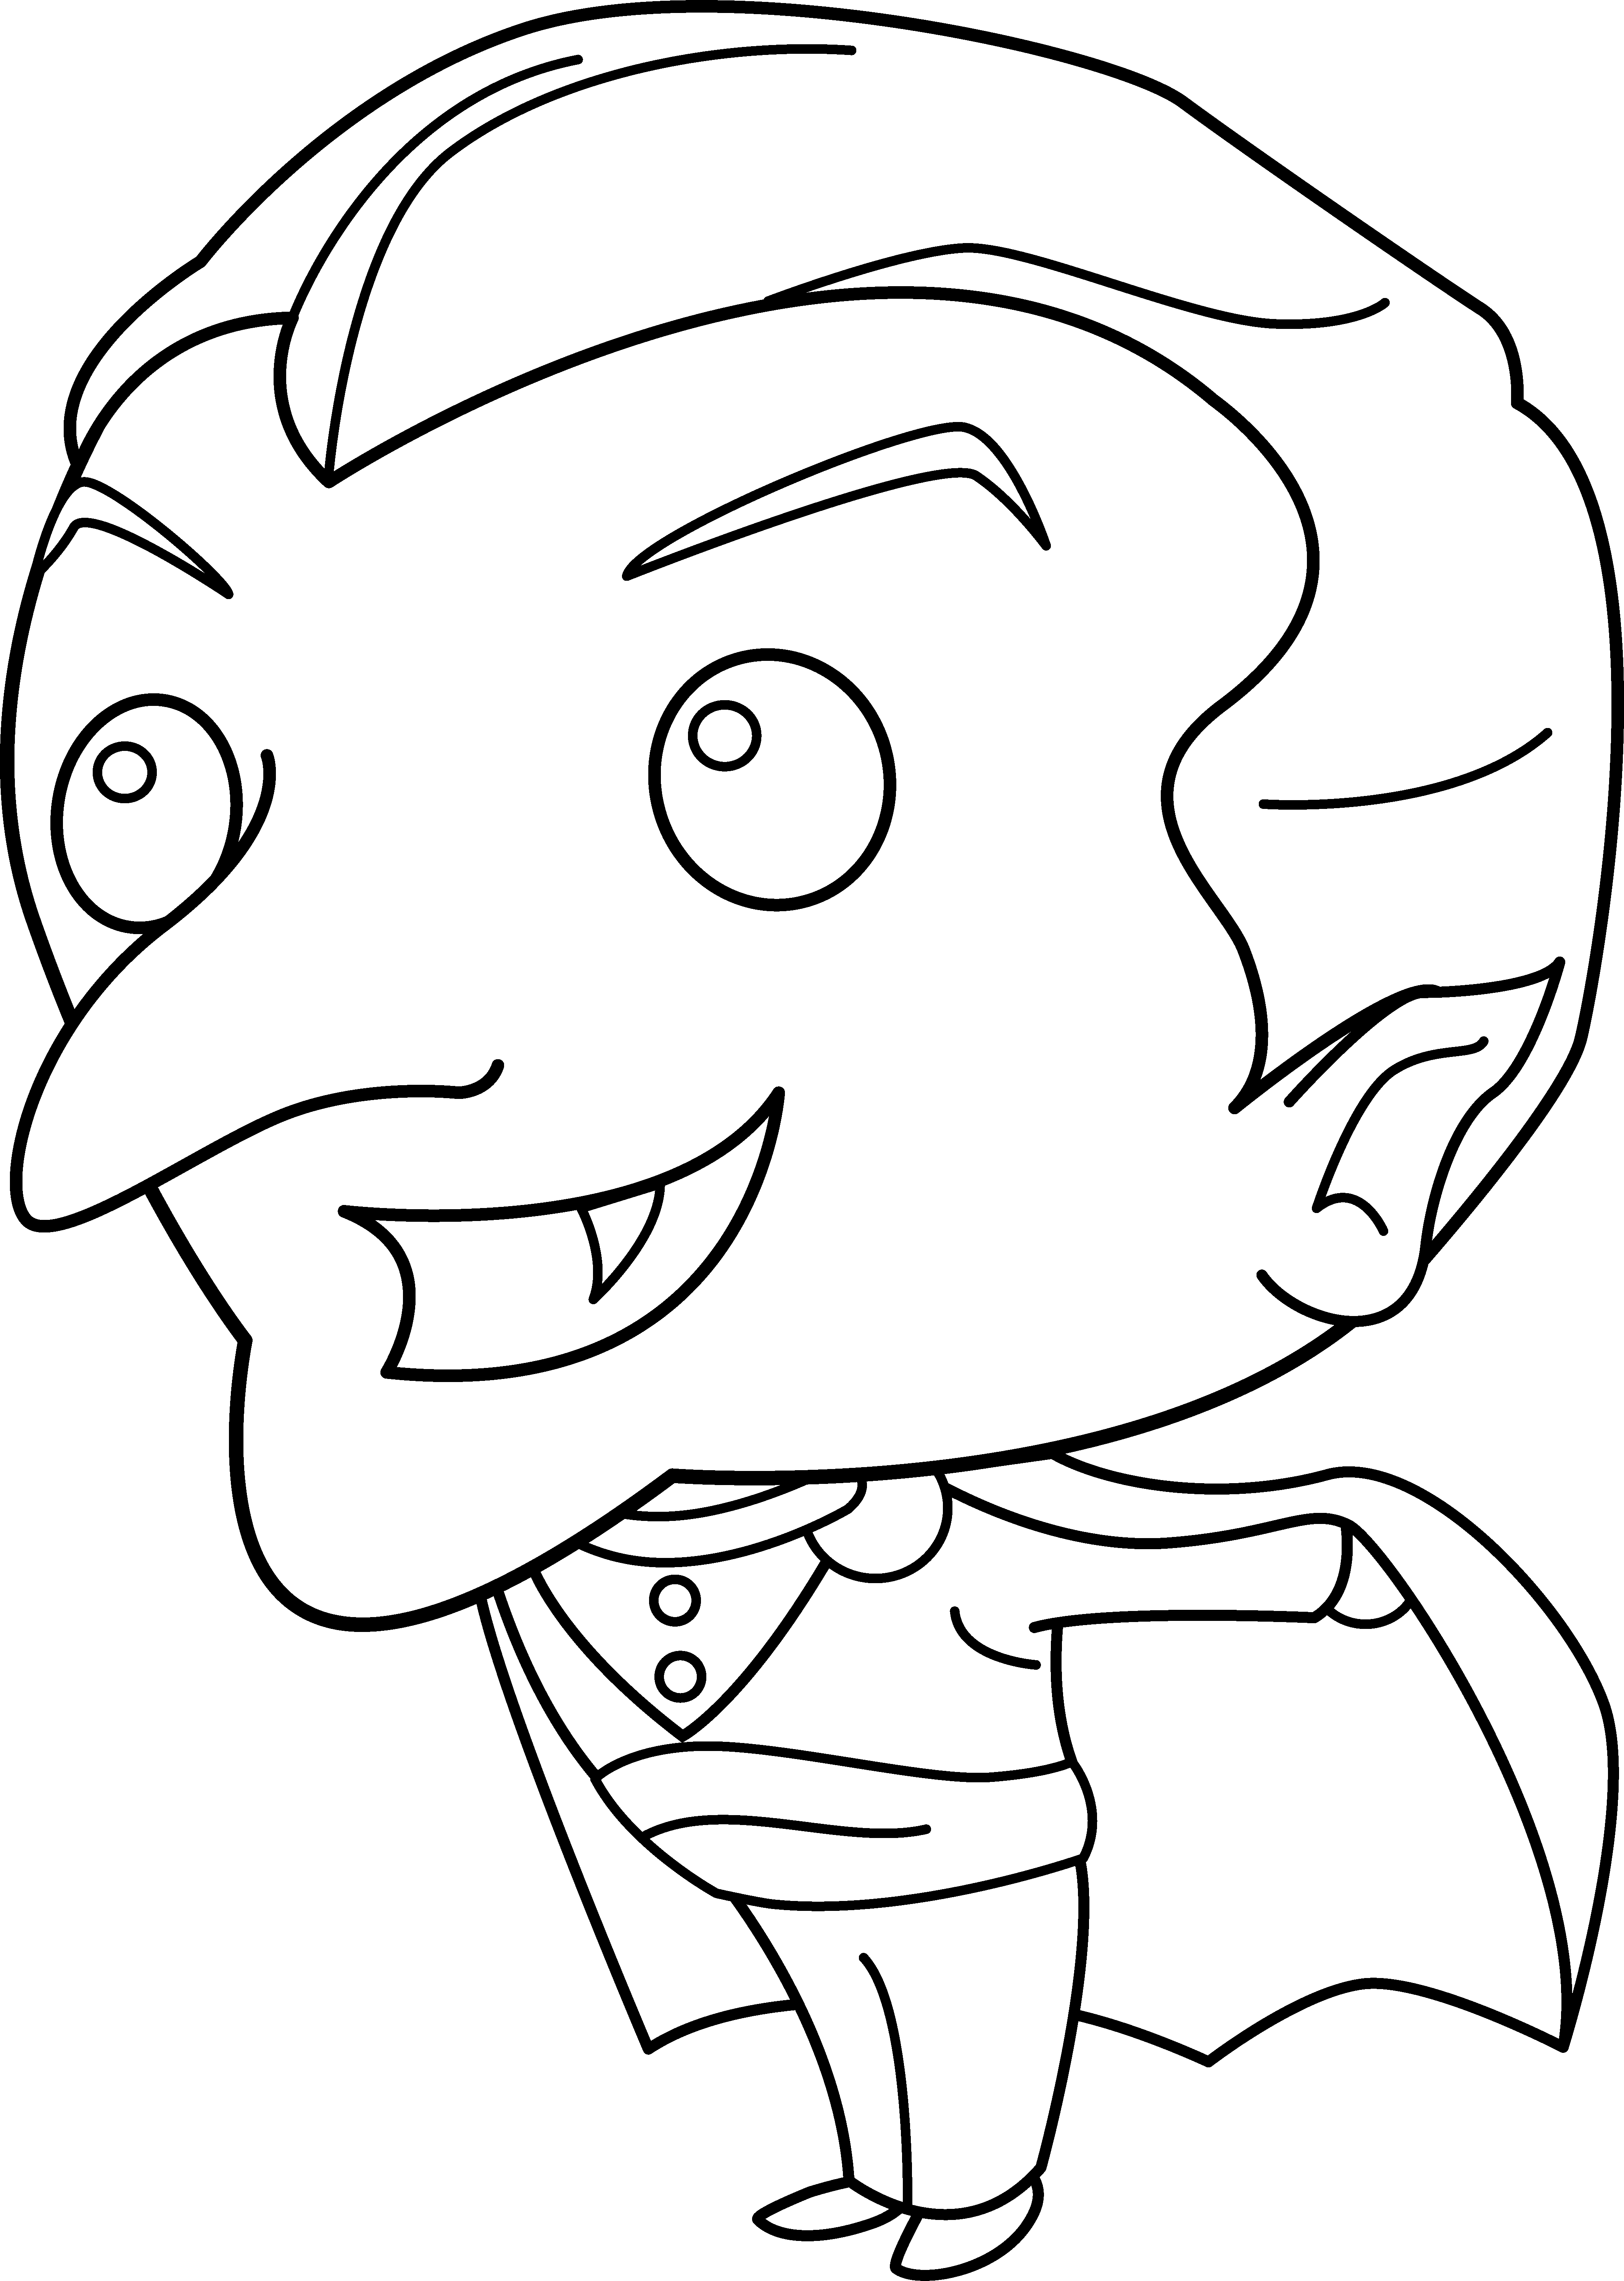 Little coloring page free. Vampire clipart vampire face